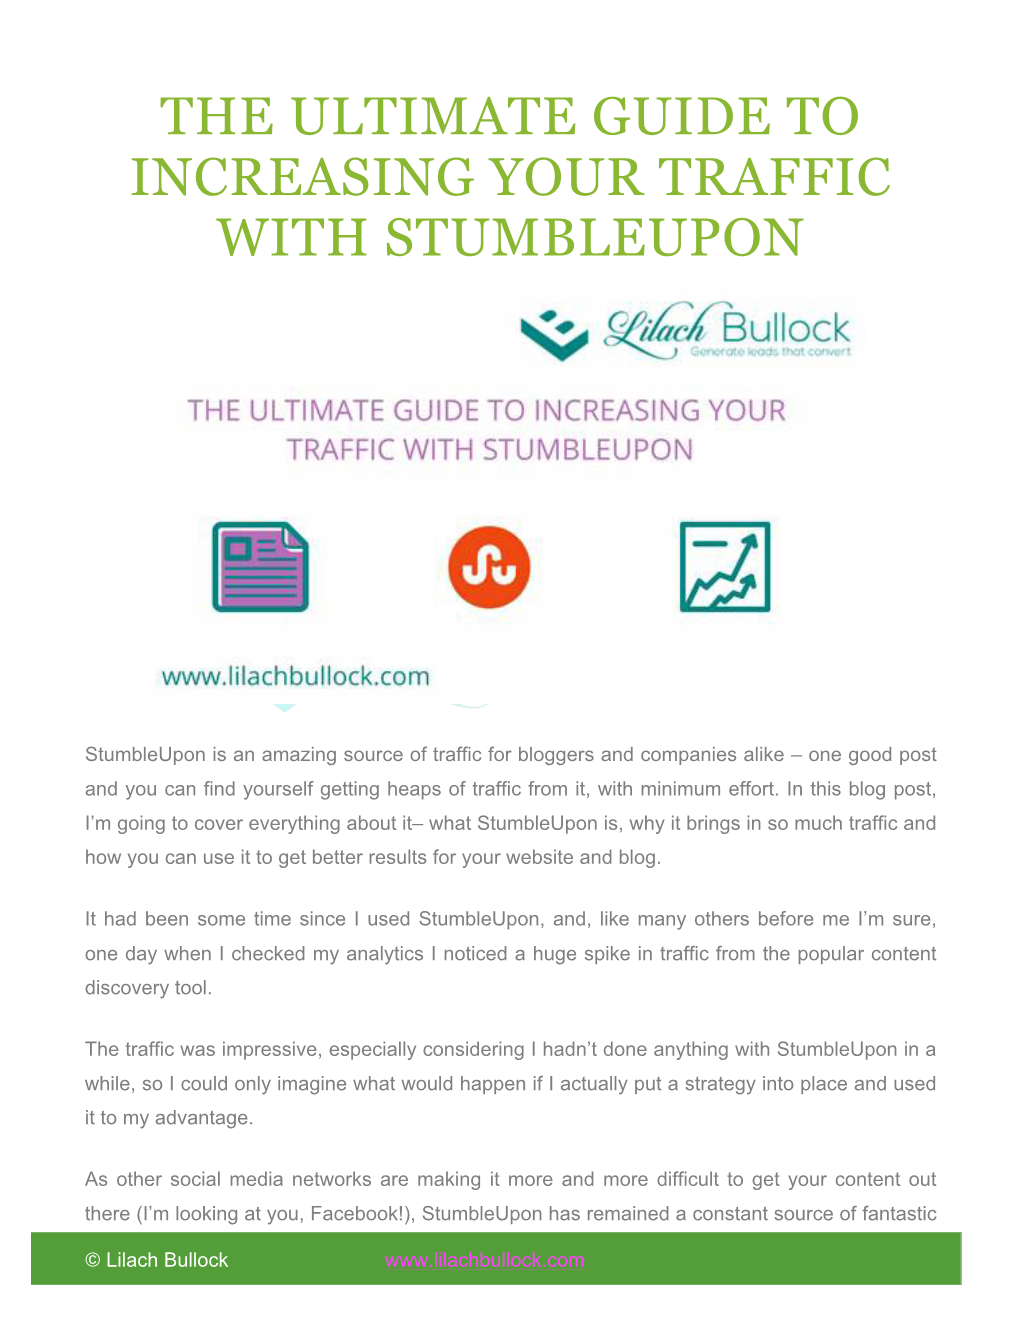 The Ultimate Guide to Increasing Your Traffic with Stumbleupon